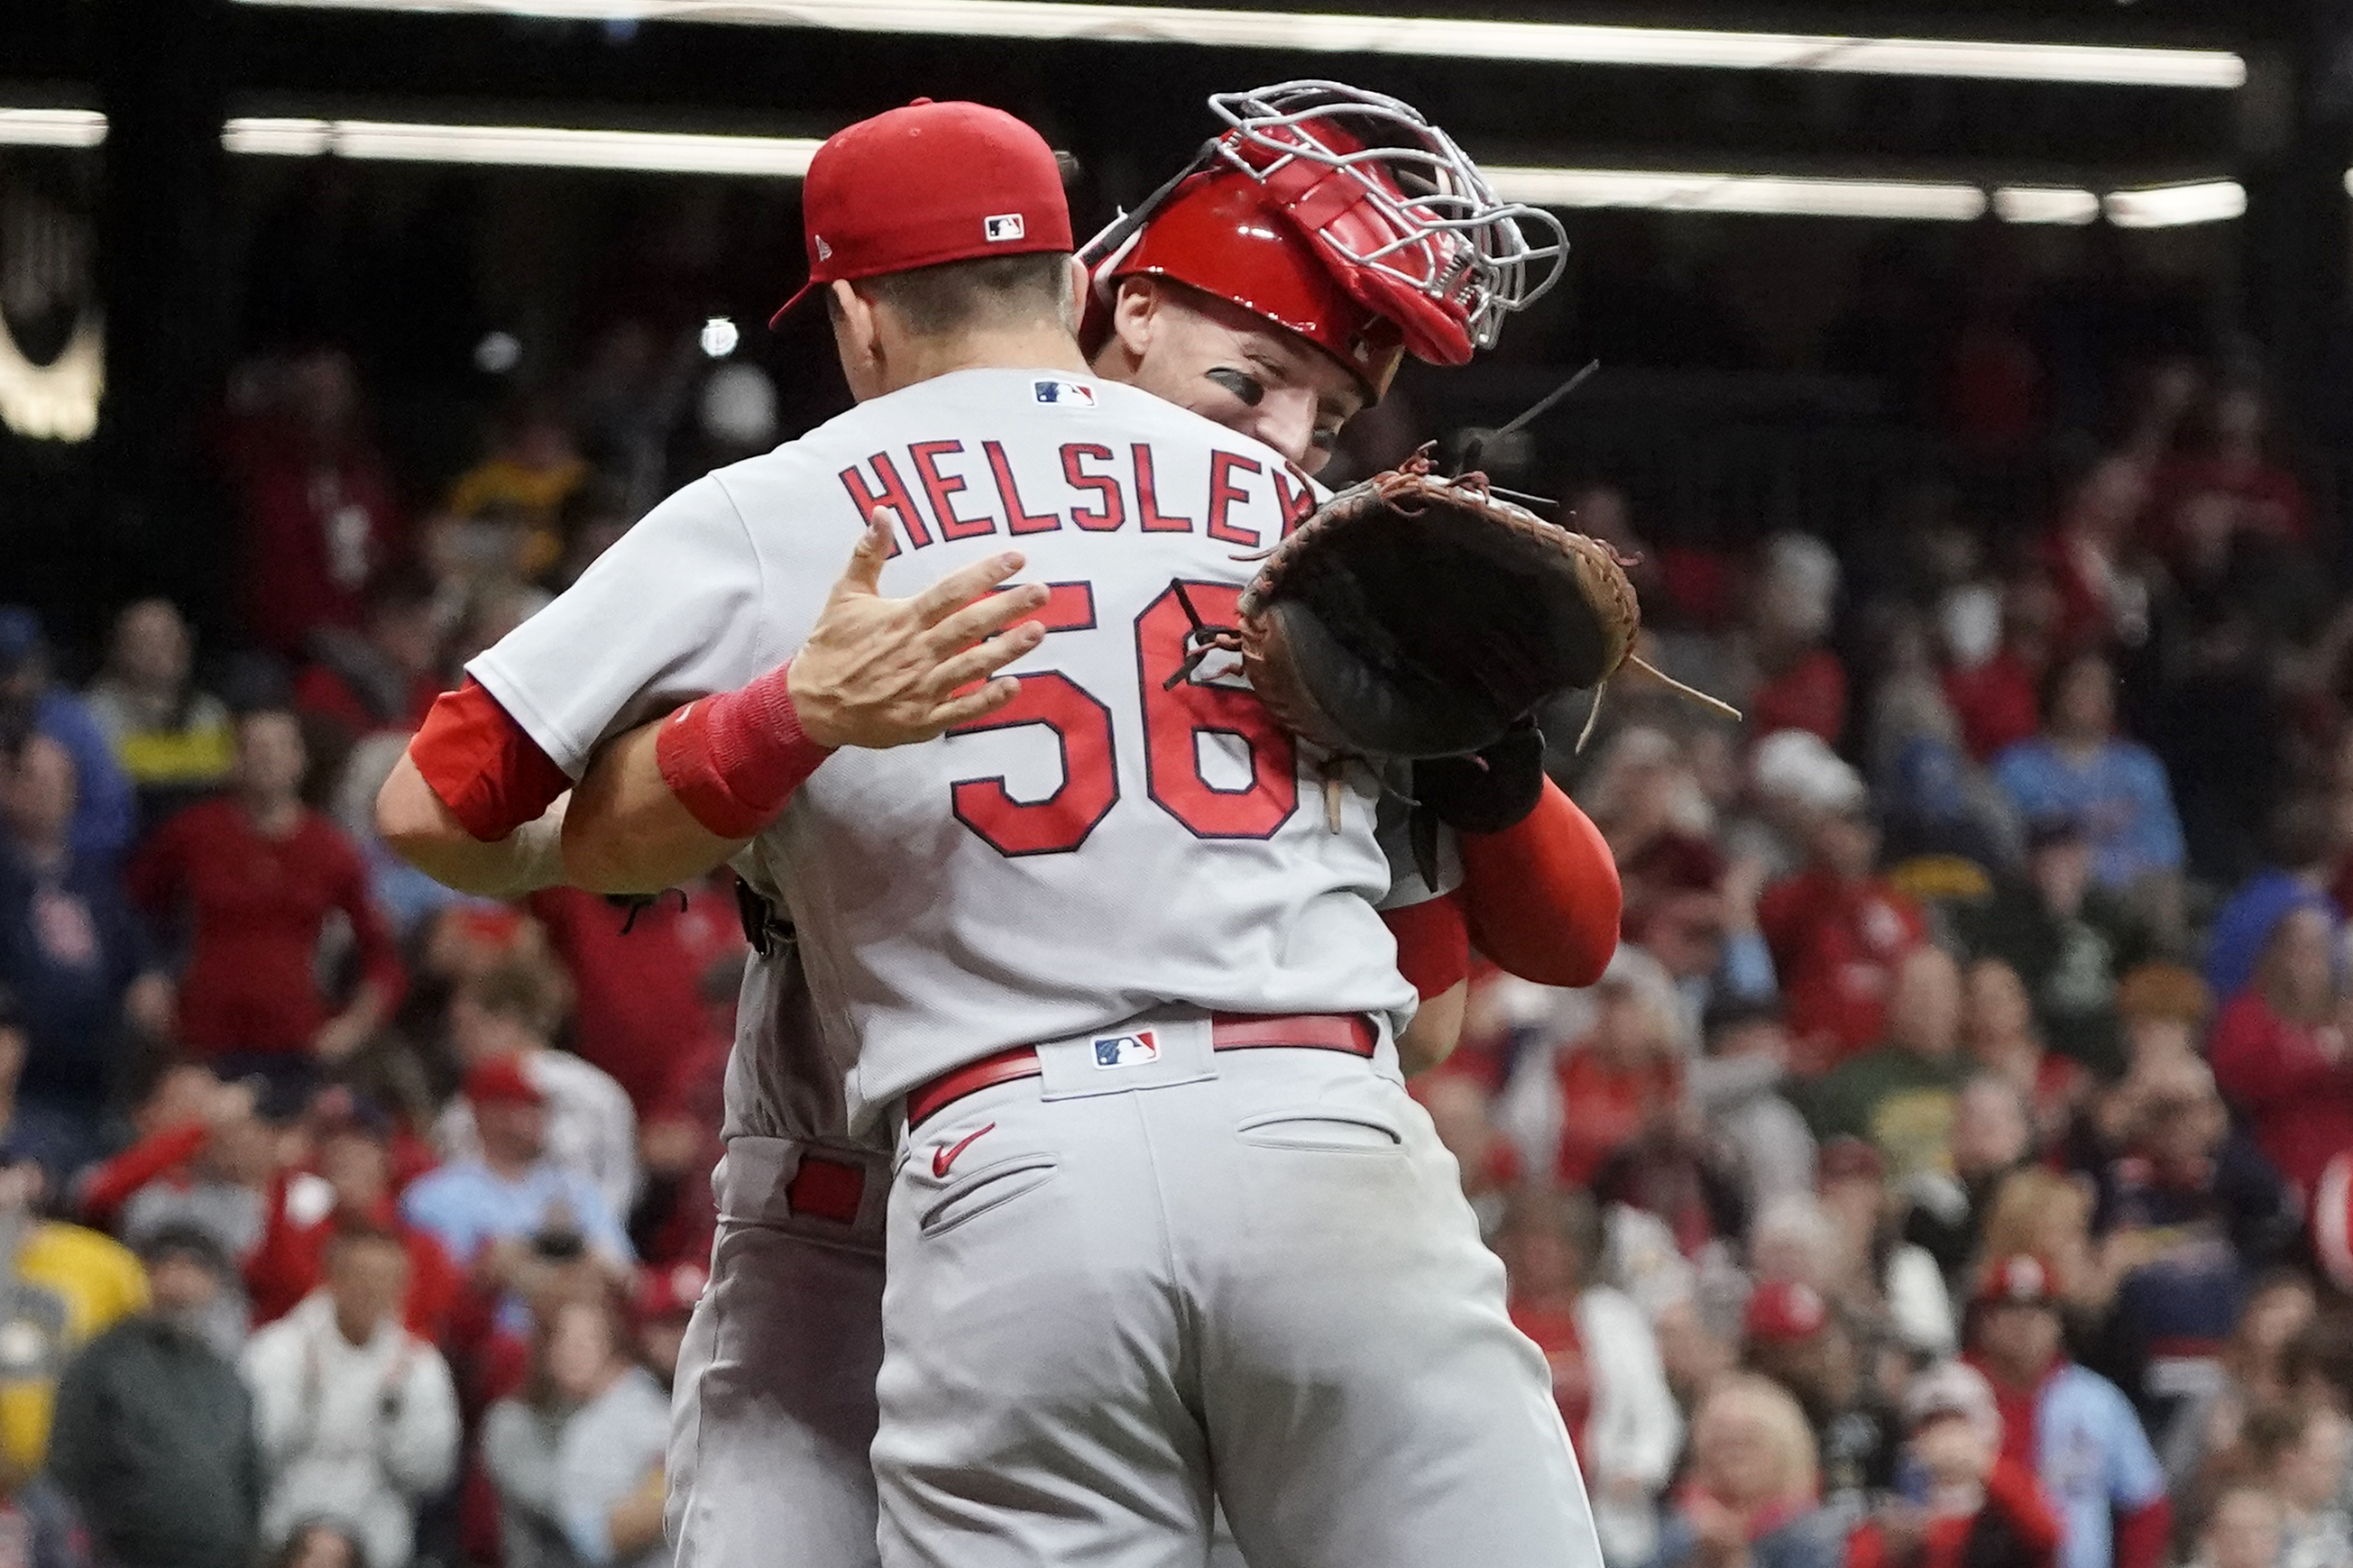 Cardinals clinch NL Central title by beating Brewers 6-2